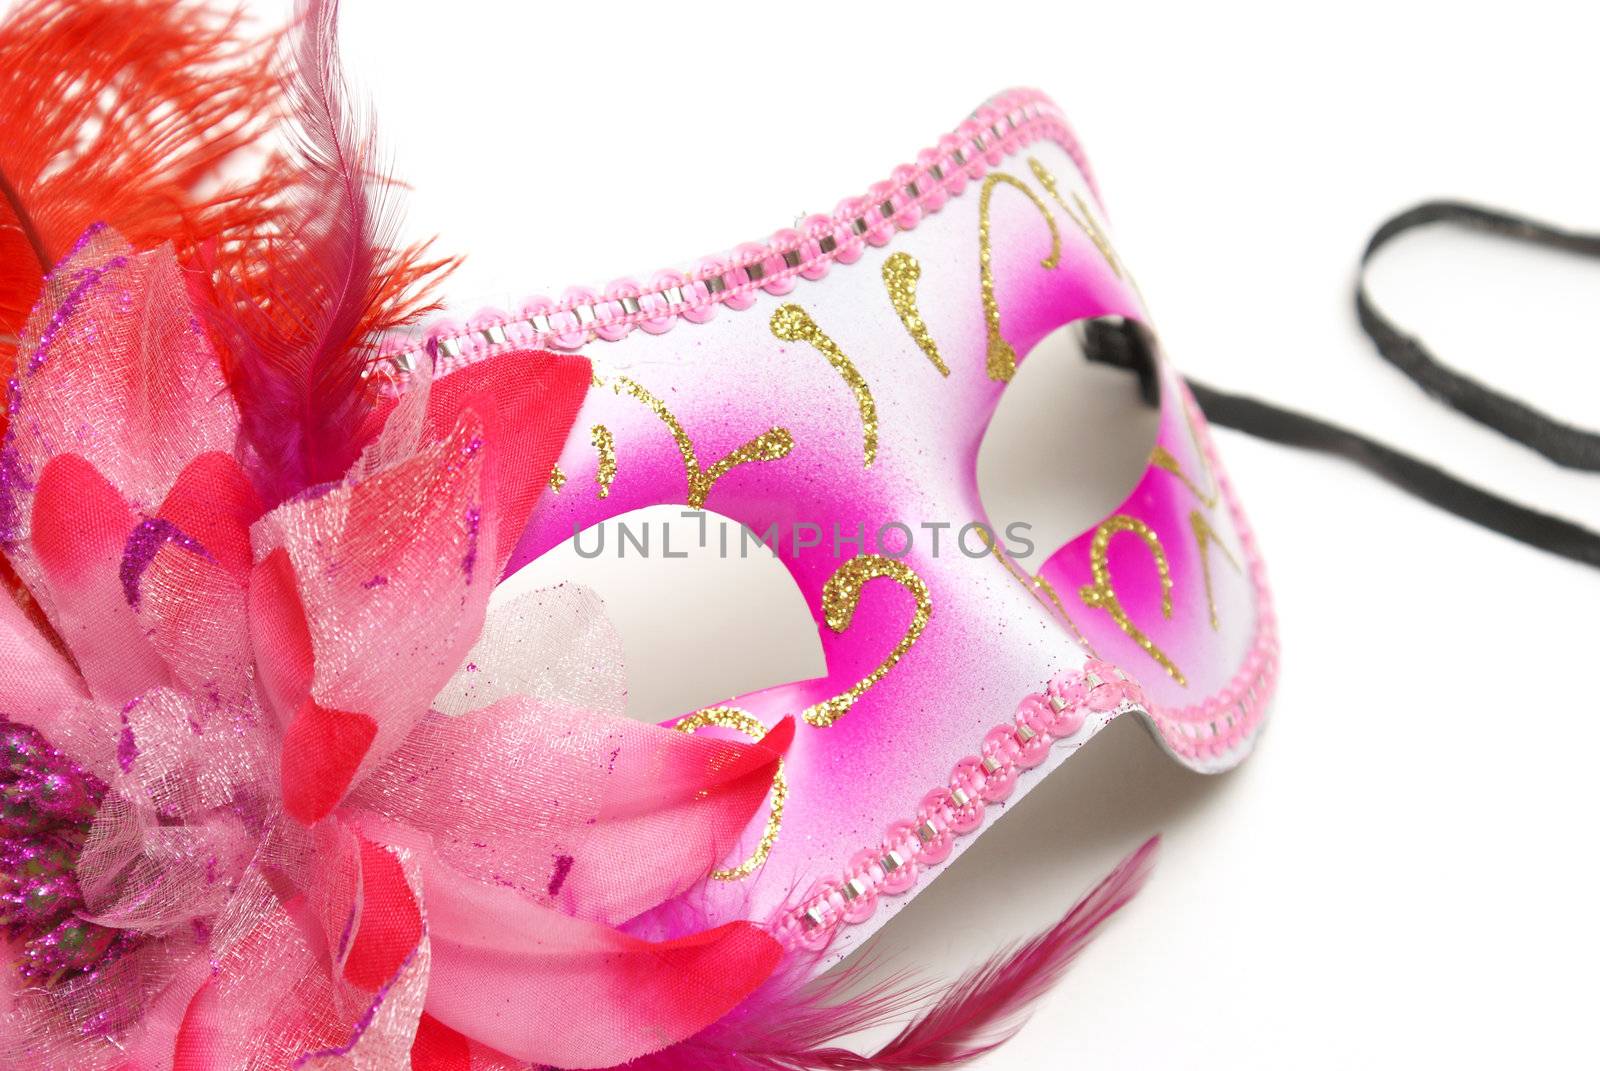 A feminine venetian mask on a white background for concealing your identity at festivities.